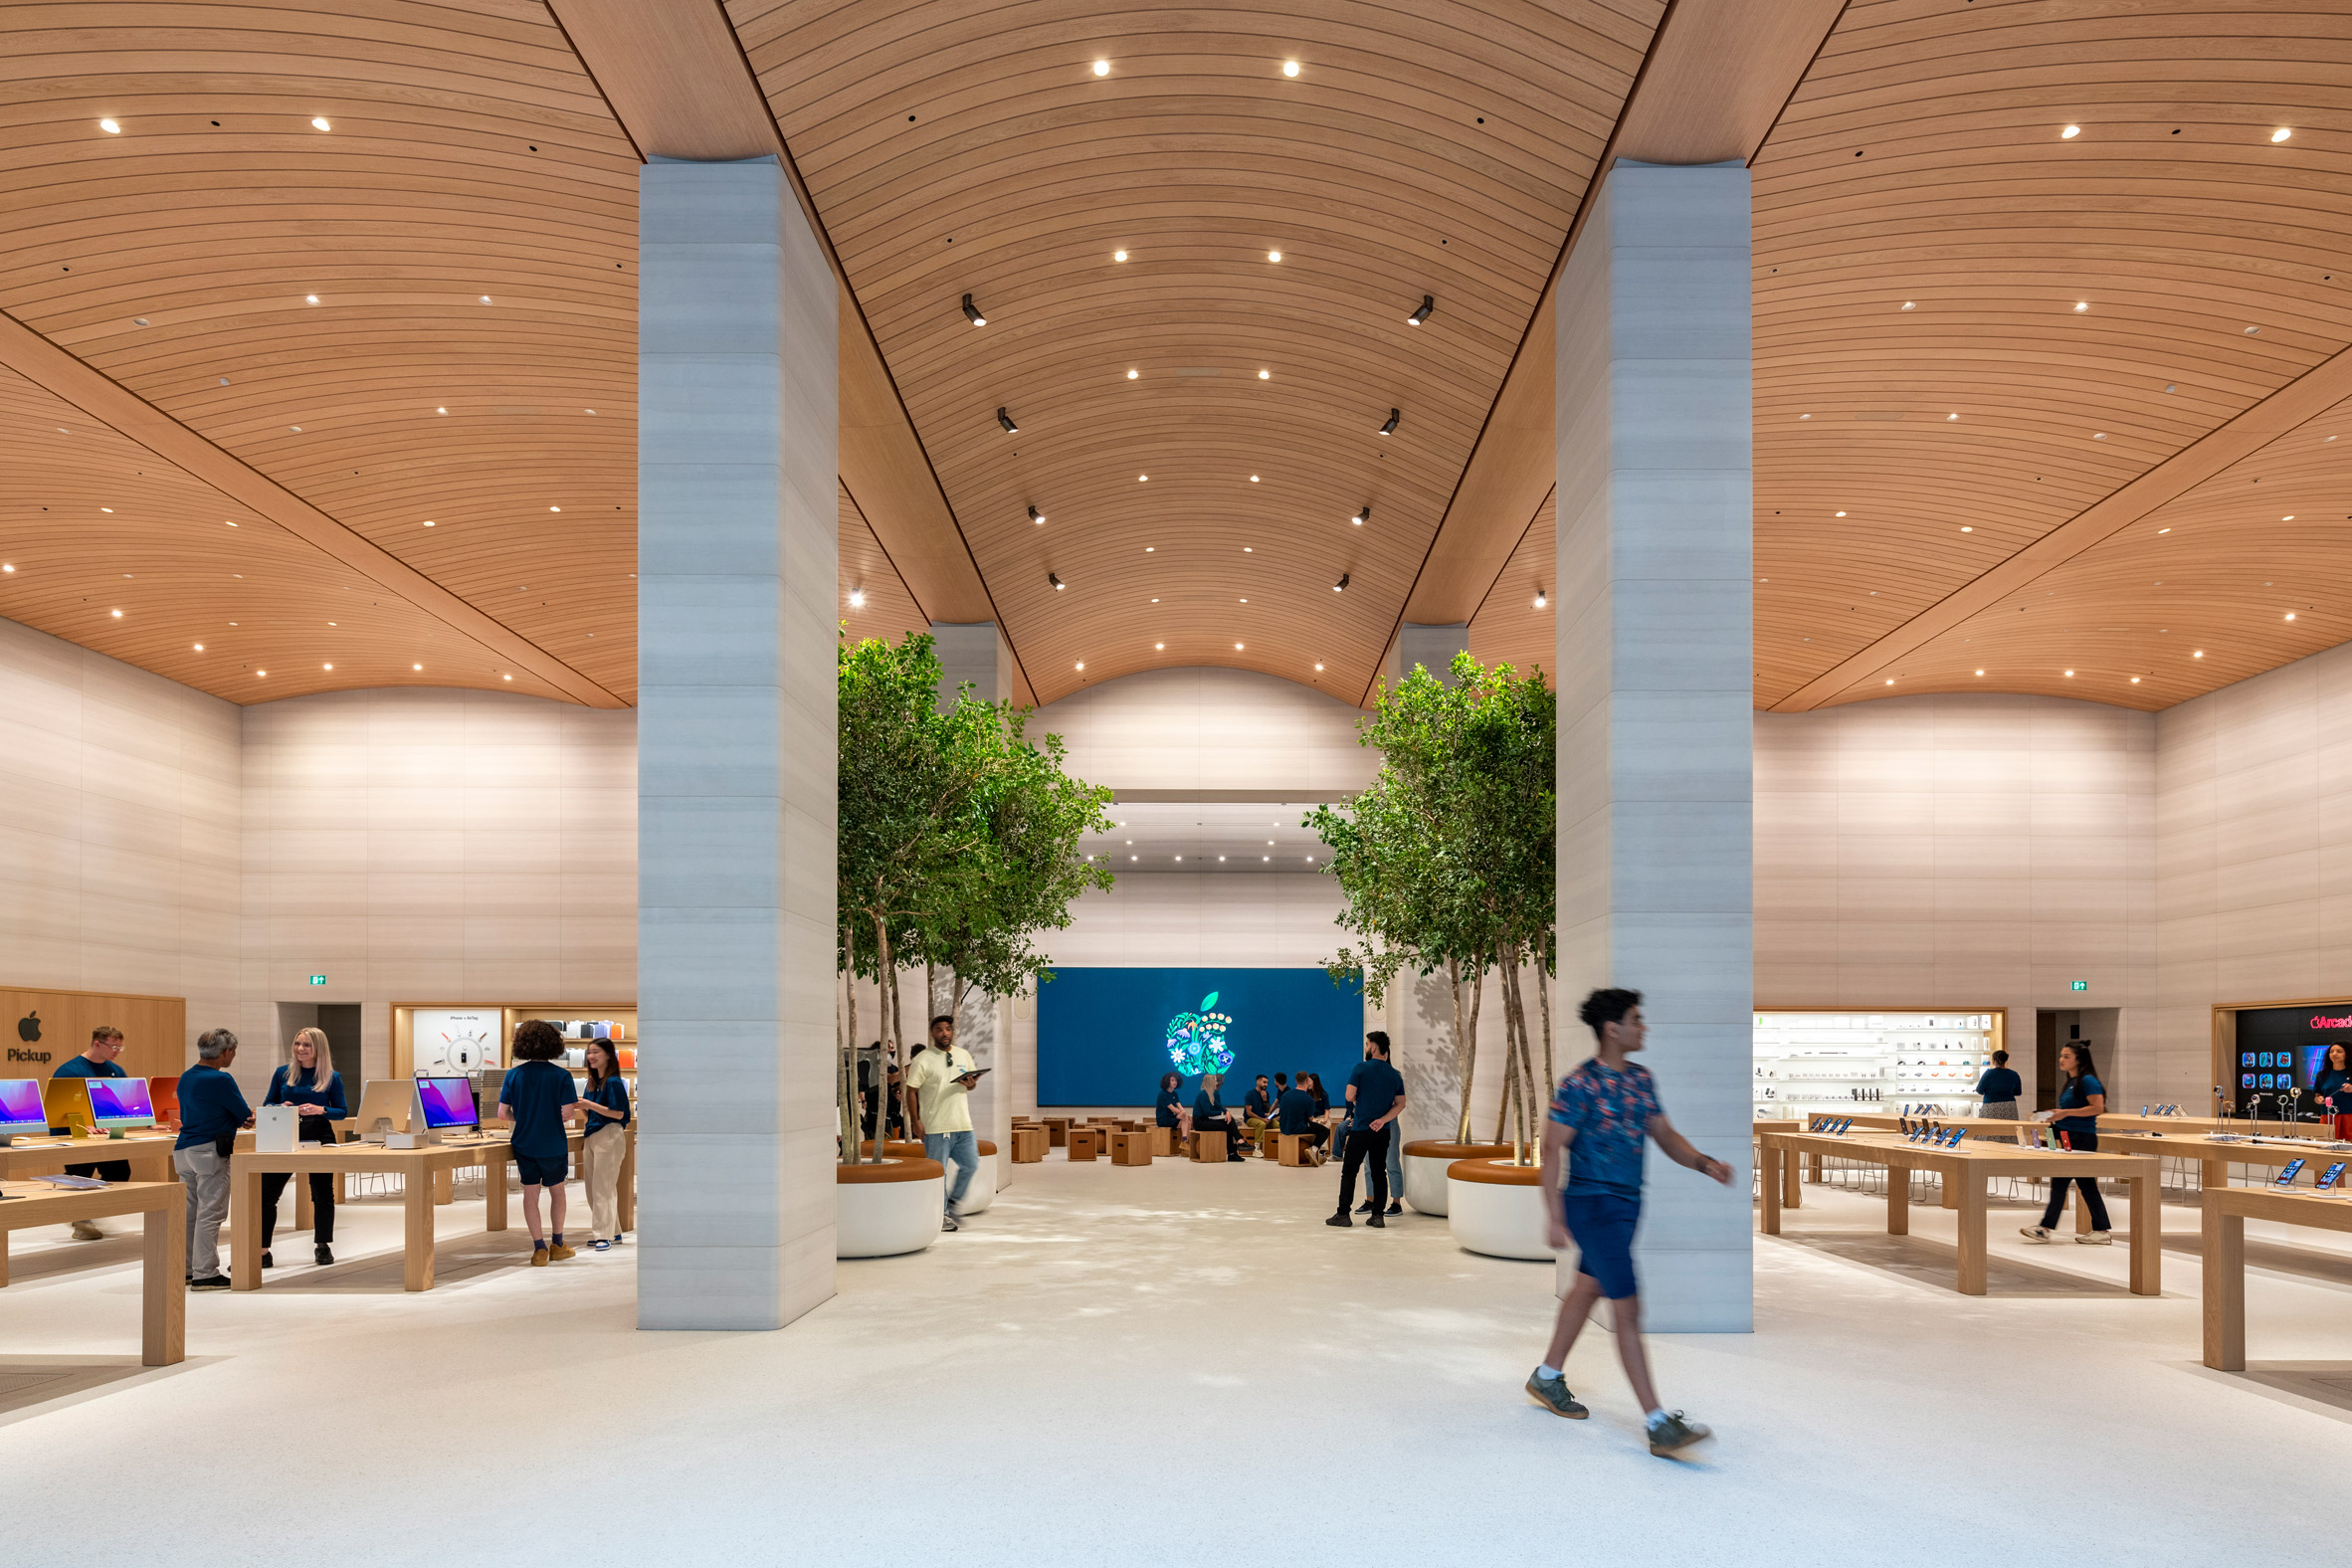  Brompton Road Apple store by Foster + Partners